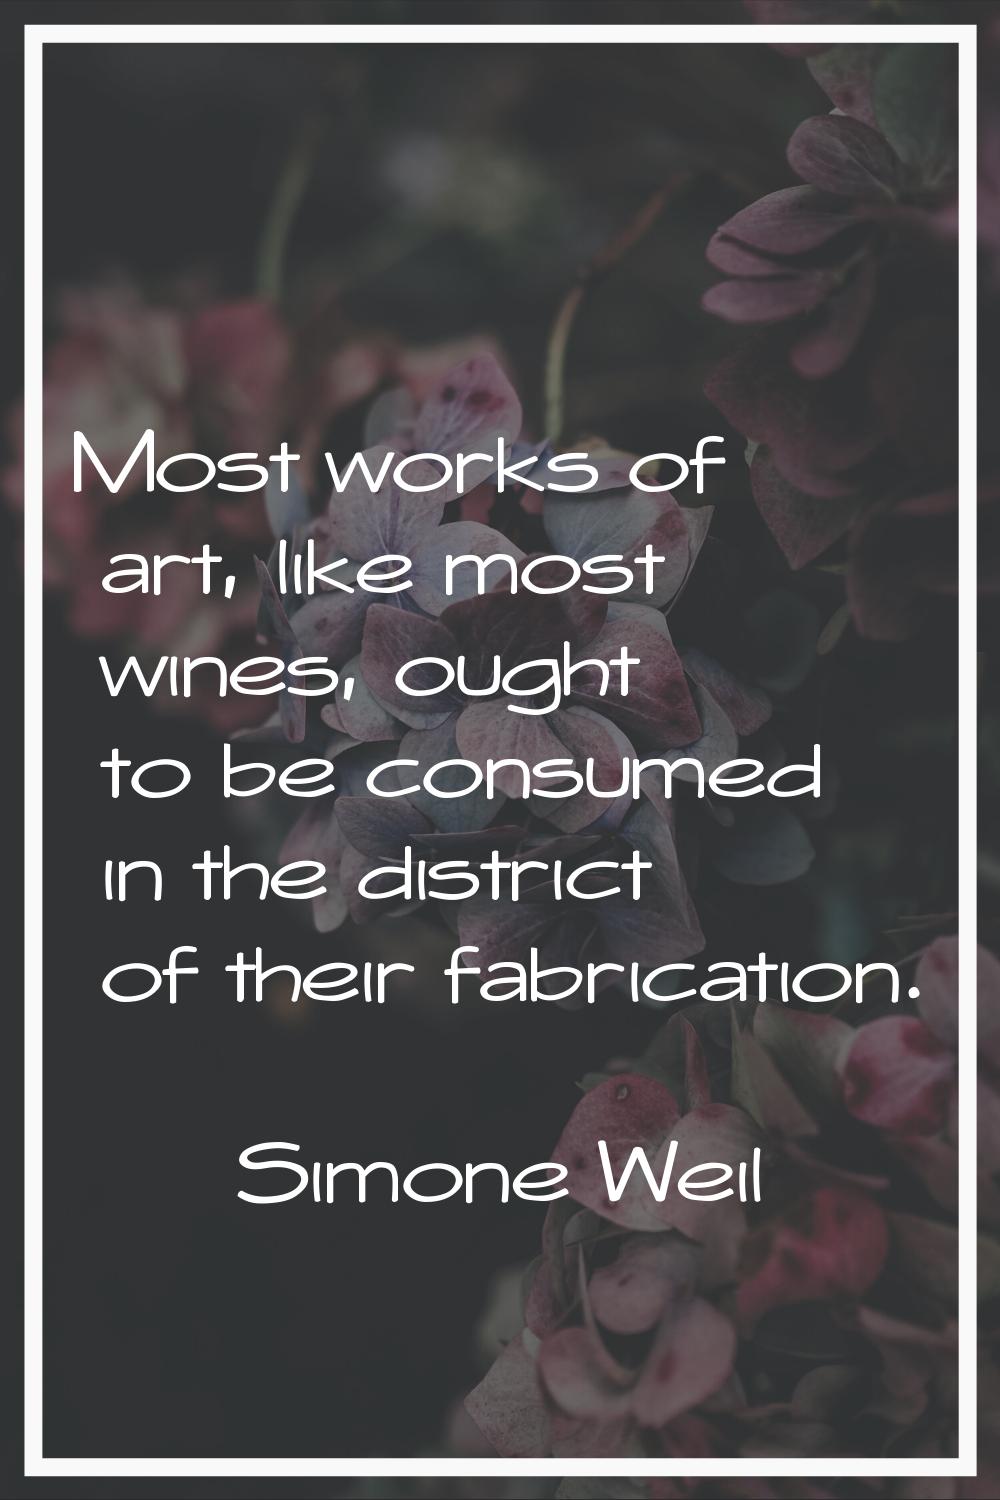 Most works of art, like most wines, ought to be consumed in the district of their fabrication.